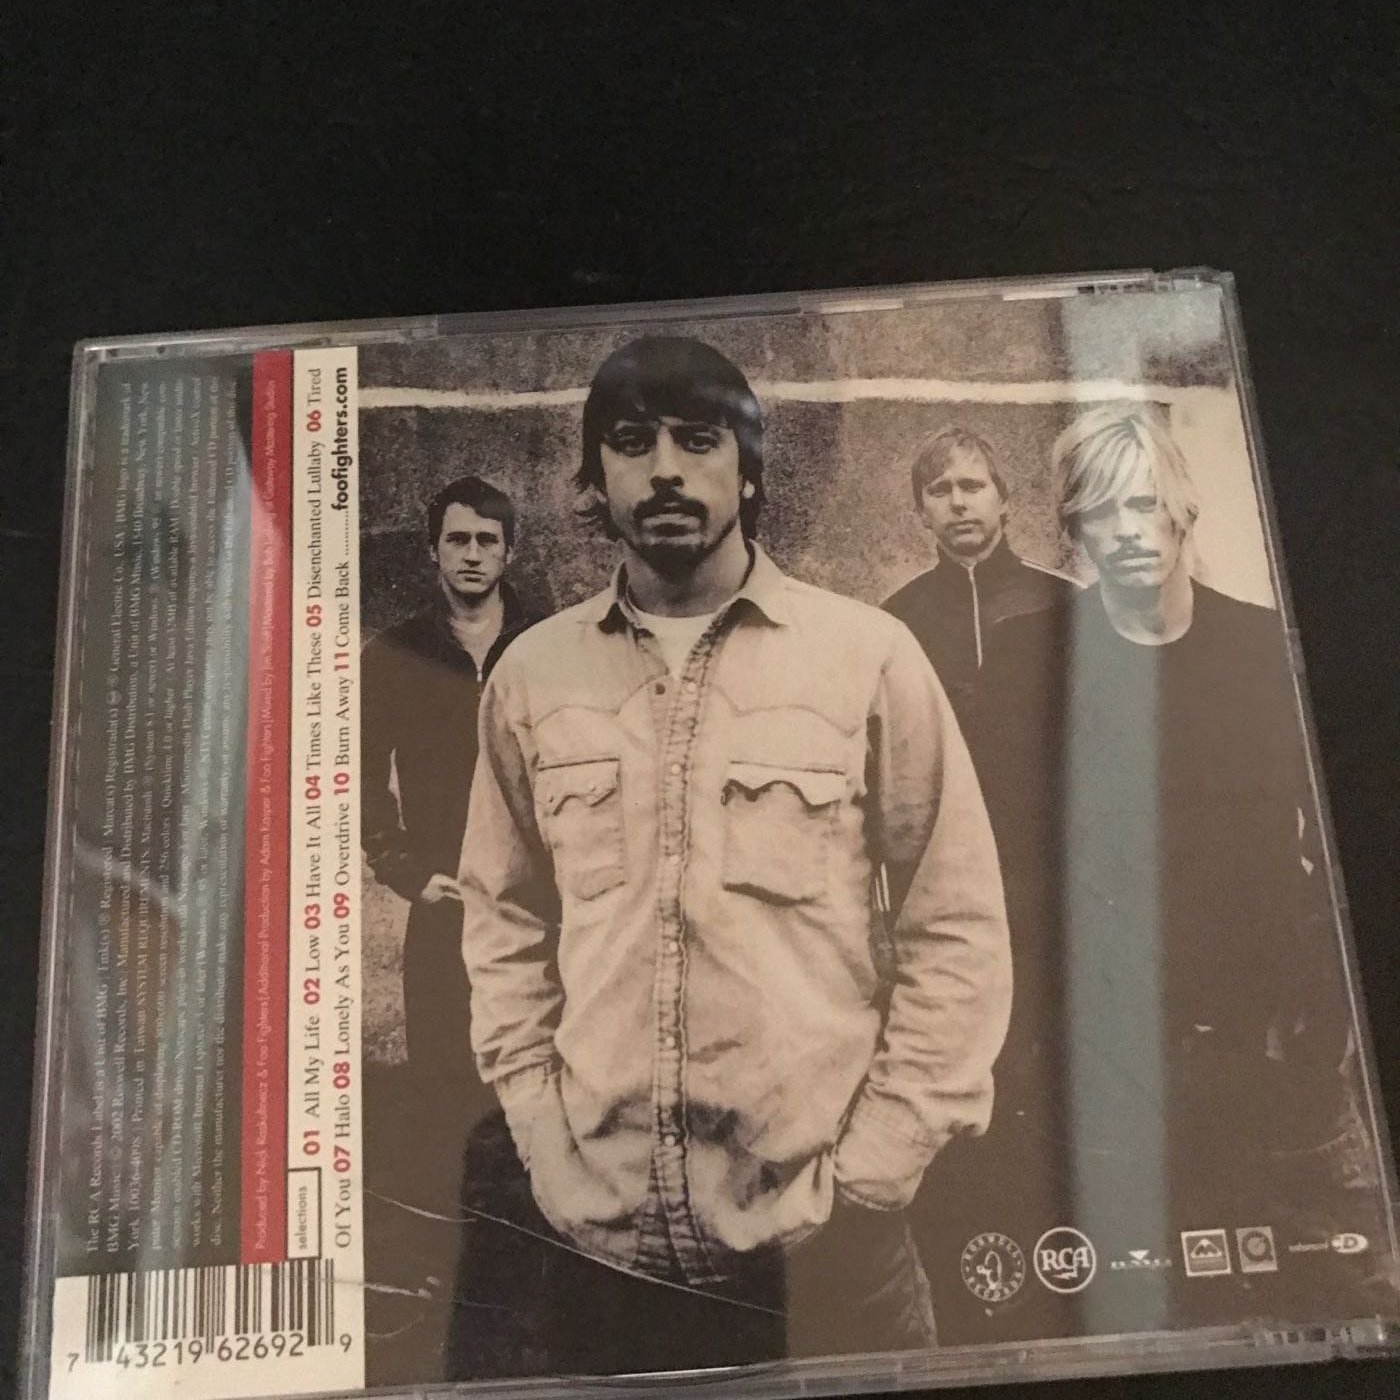 Foo Fighters One By One Cd Dvd專輯 Yahoo奇摩拍賣